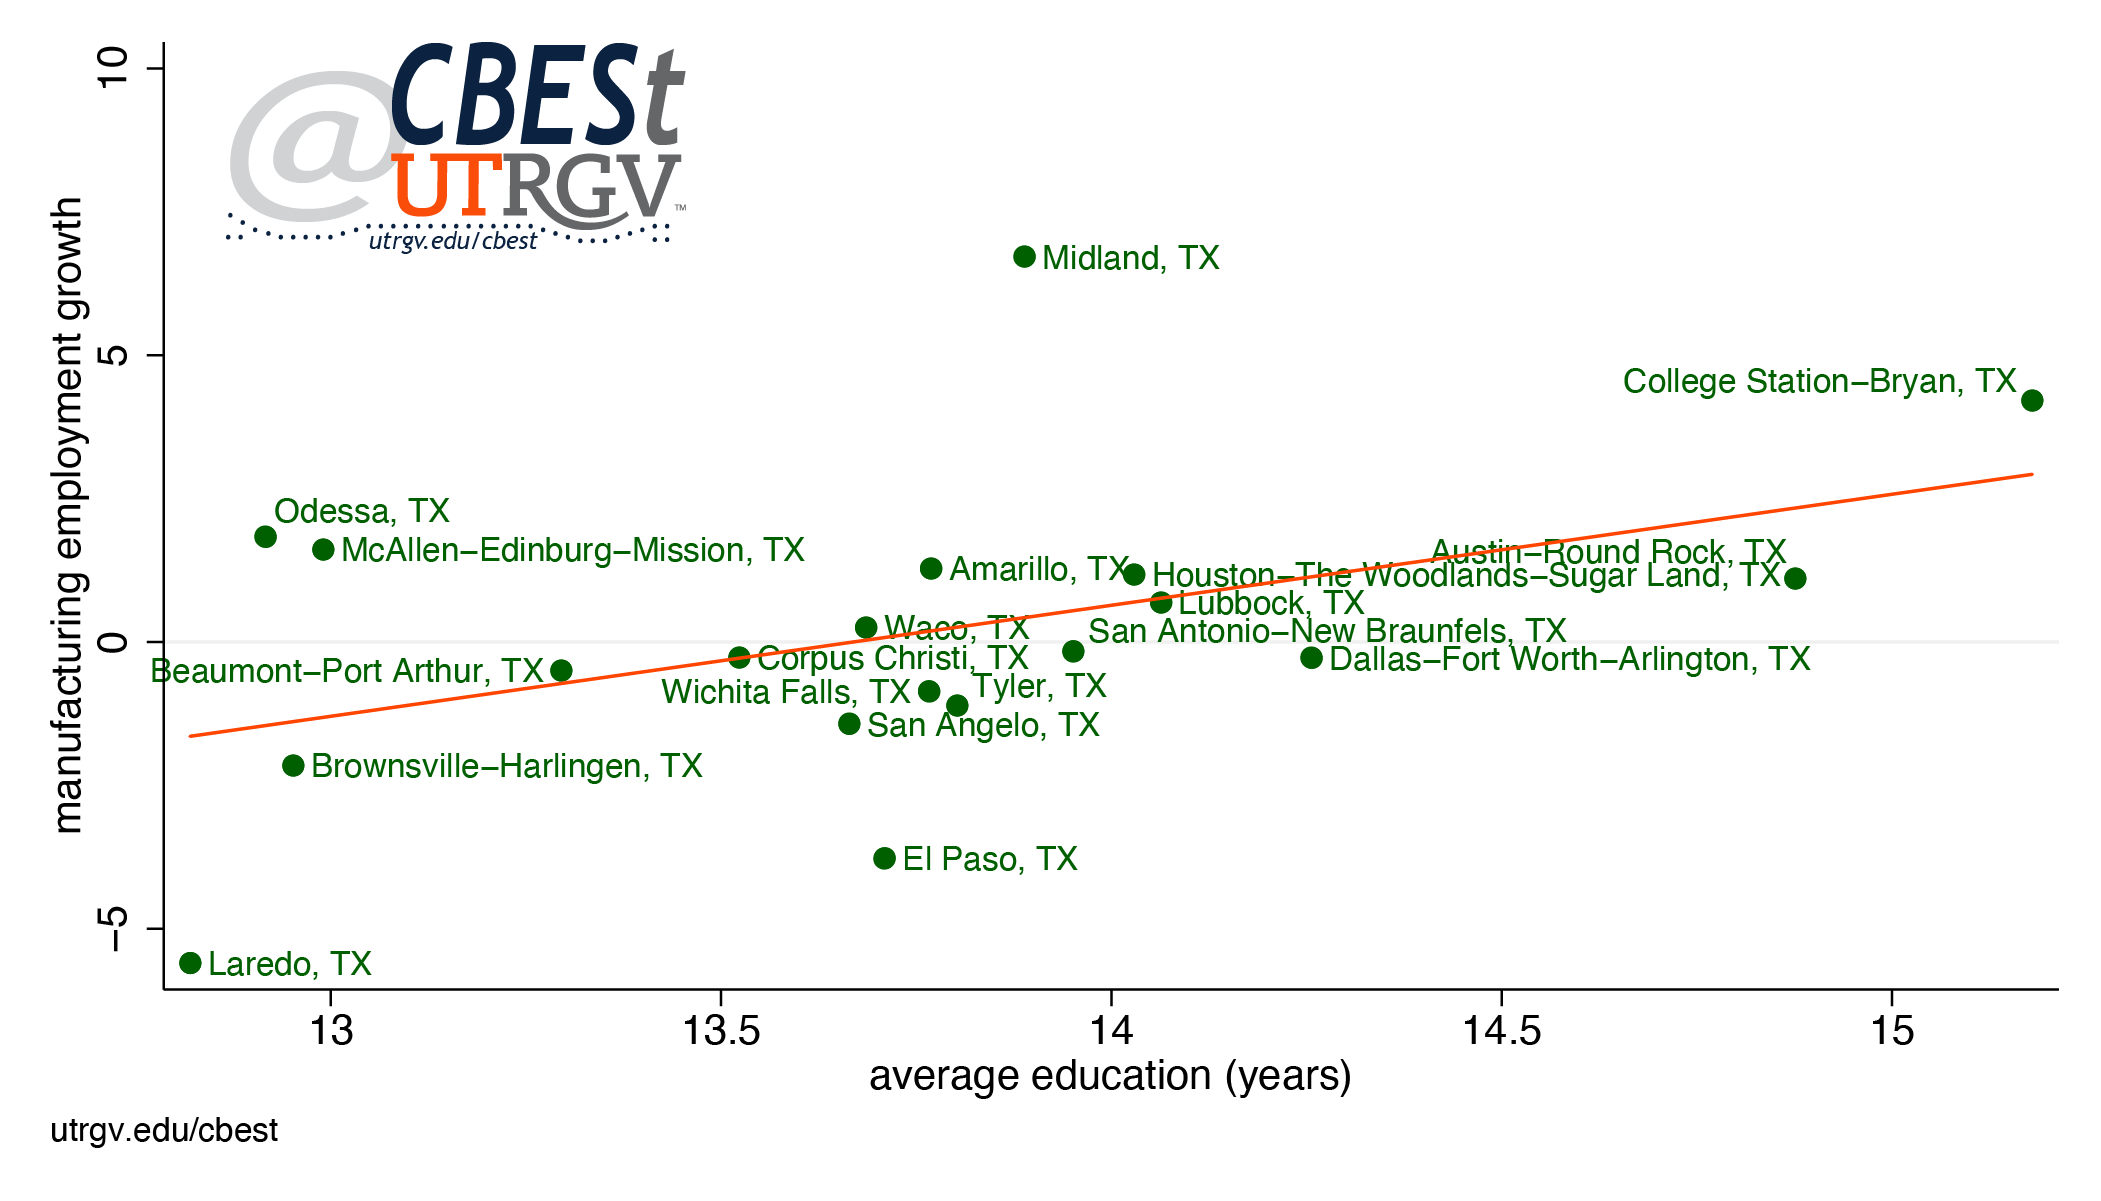 Correlation between annualized manufacturing employment growth and average education, 2005-2018